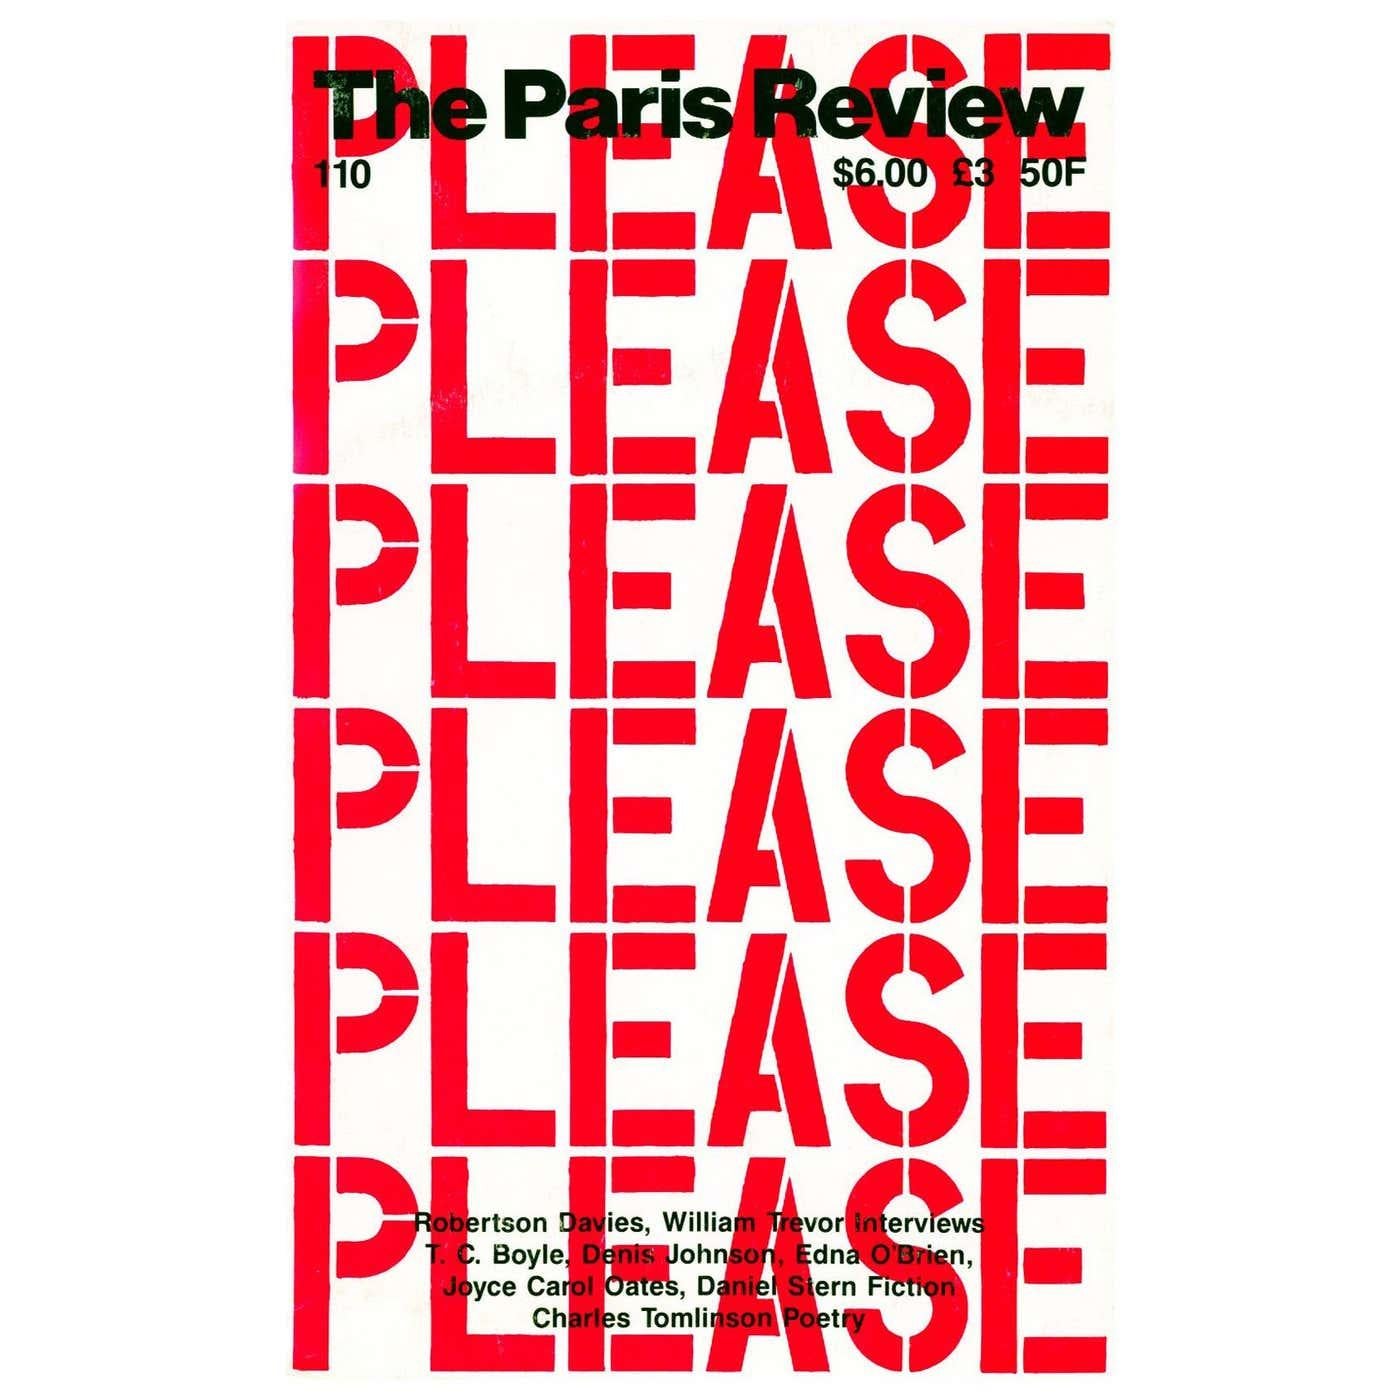 Christopher Wool The Paris Review:
1989 The Paris Review book, with original cover design by Christopher Wool.

Offset lithograph on double sided art periodical. The full book. 

Measures approximately: 6 x 9 inches; soft cover.

Minor rub &